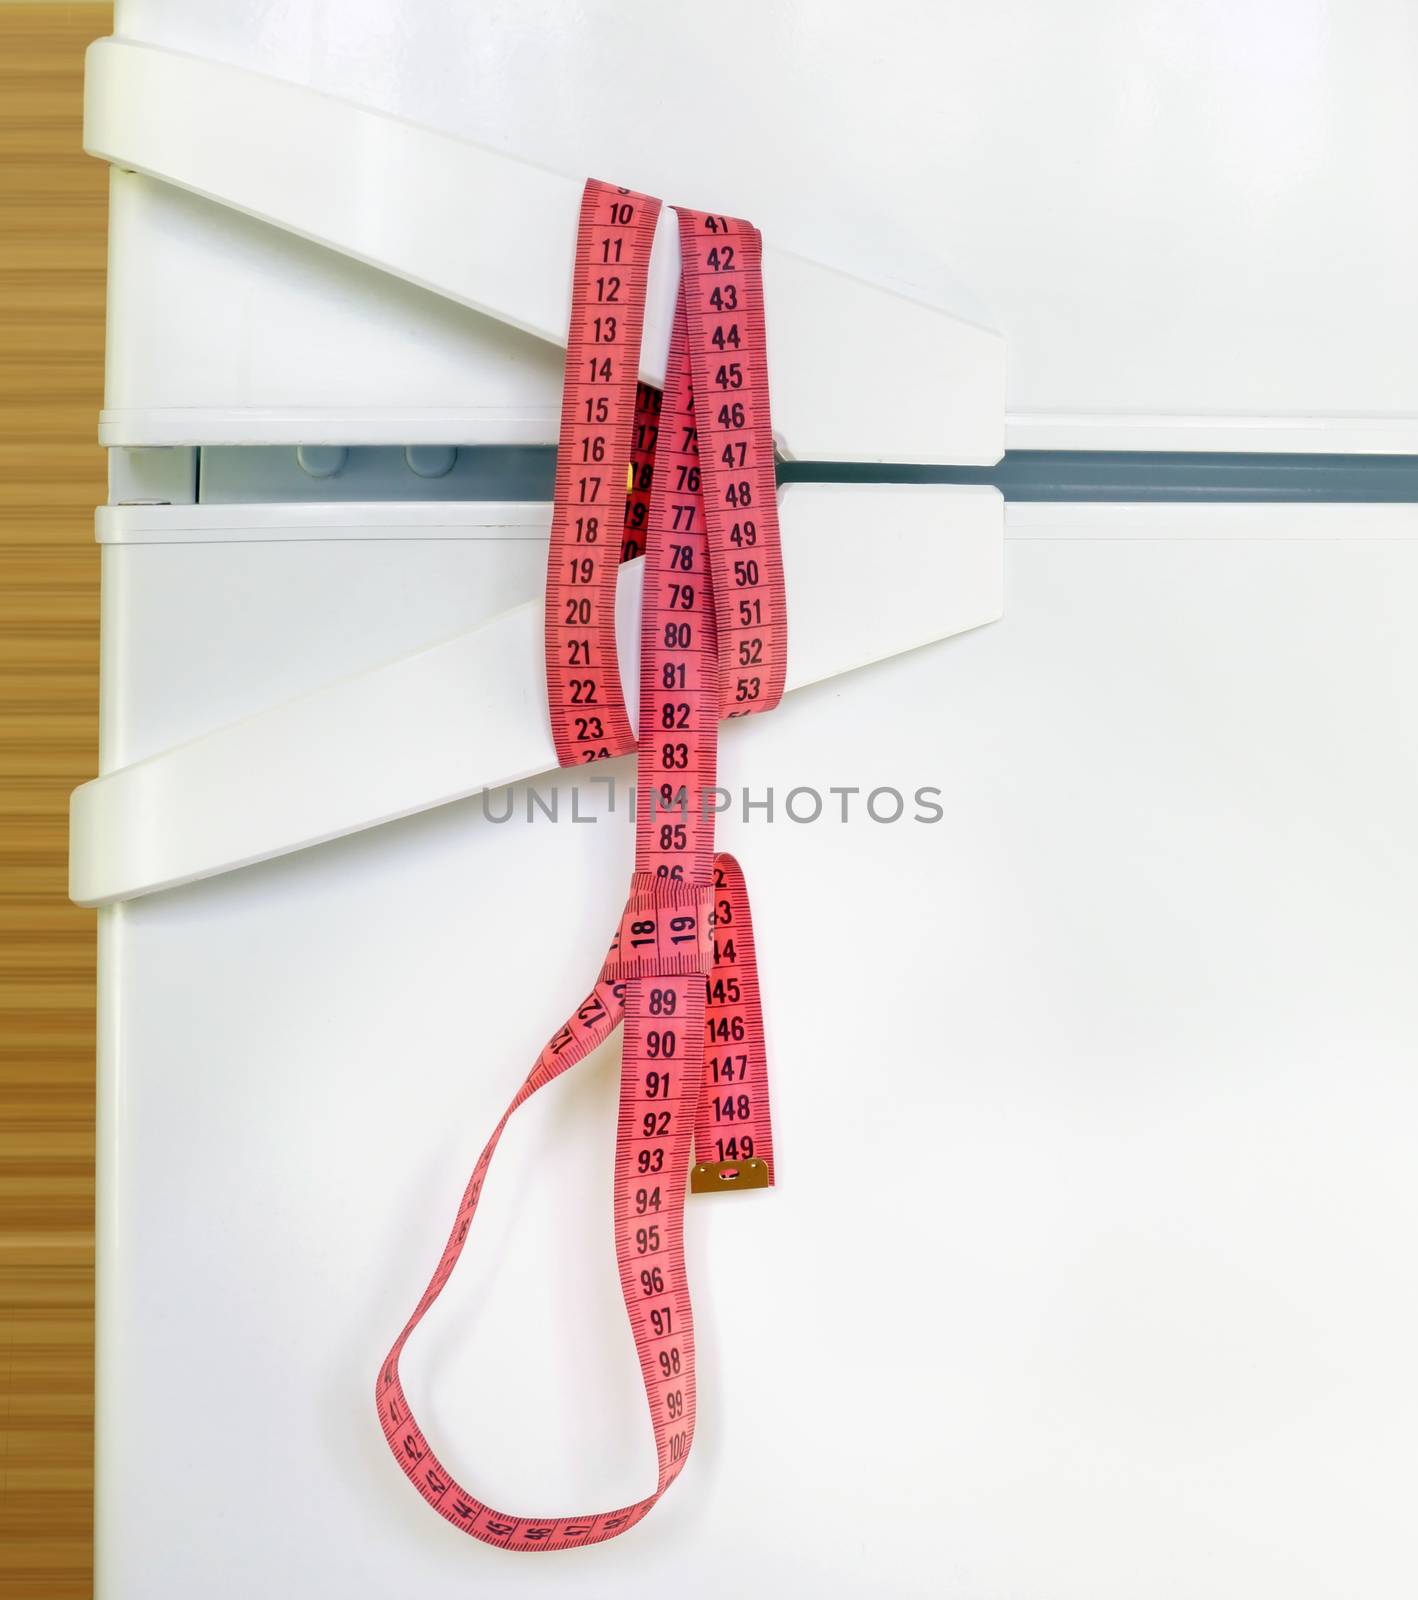 Measuring tape noose on refrigerator door. Diet and anorexia concept